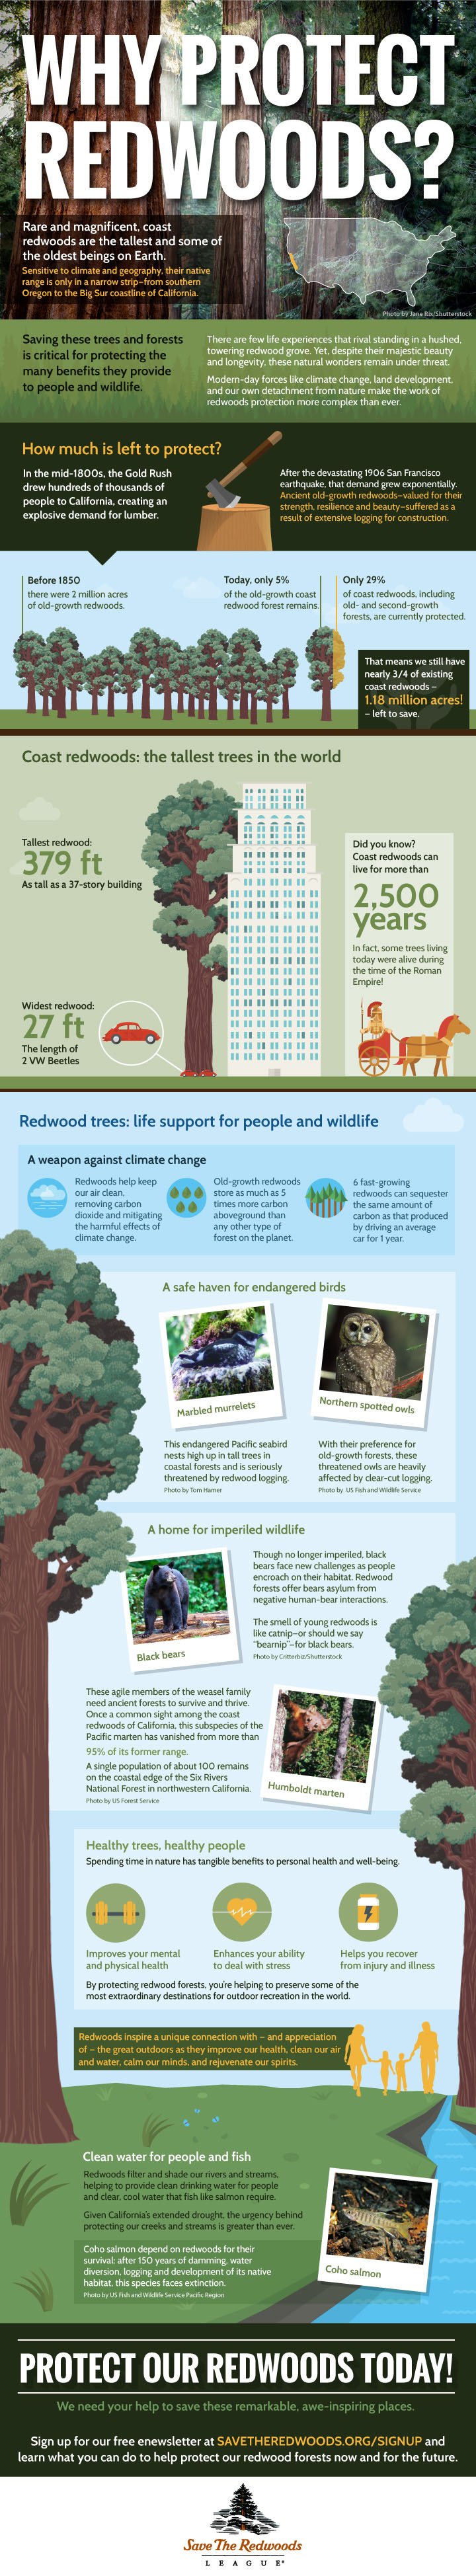 Why Protect Redwoods Infographic